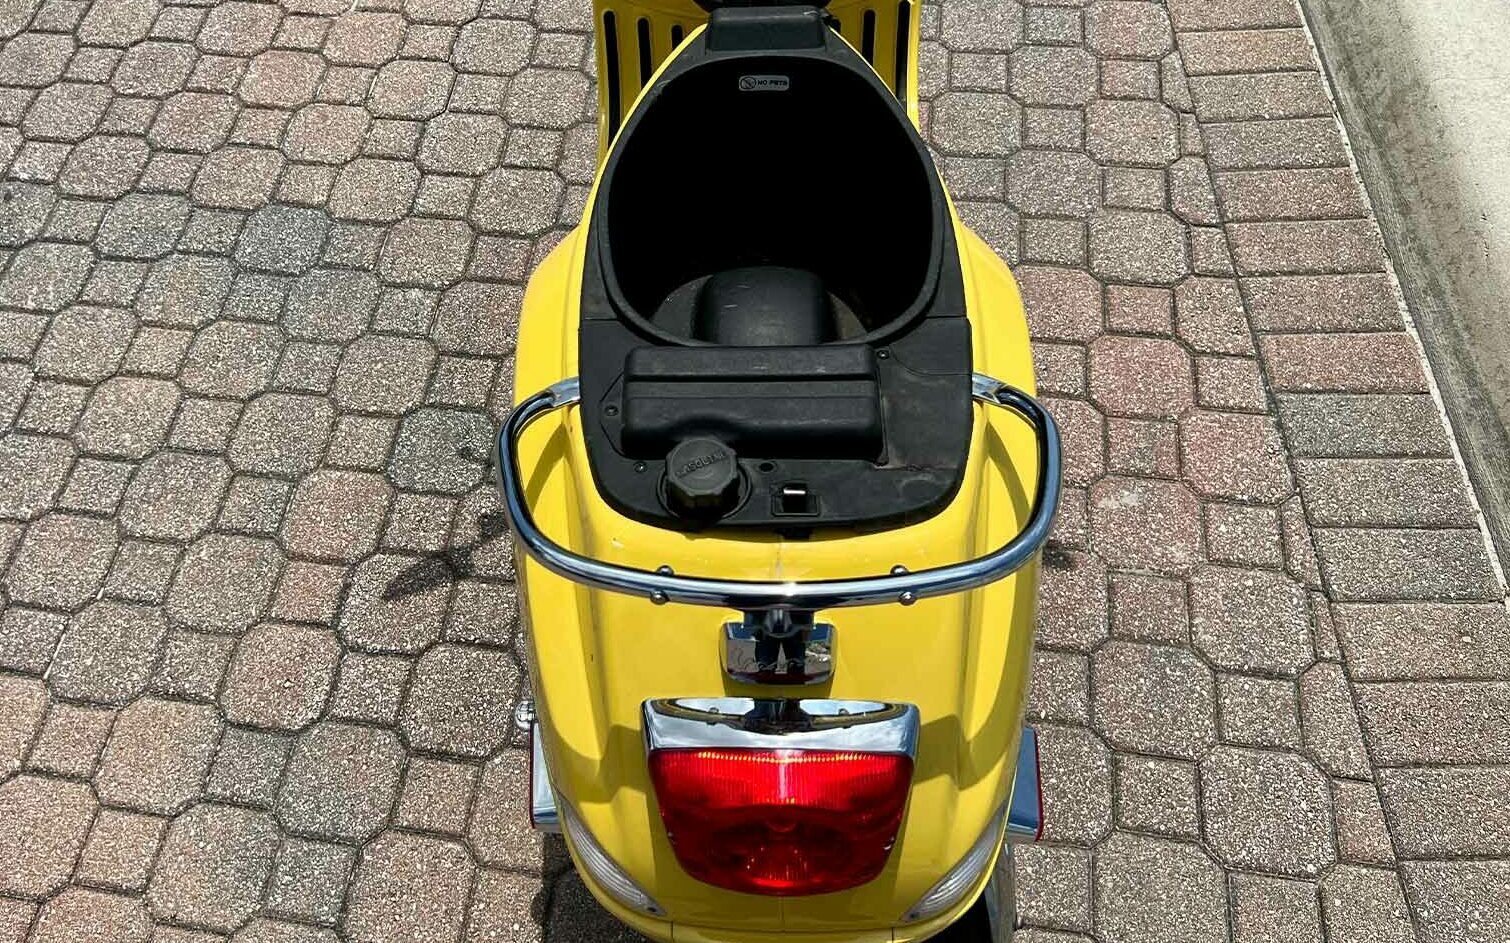 vespa-scooter-rental-lx50-yellow-seat-top-view